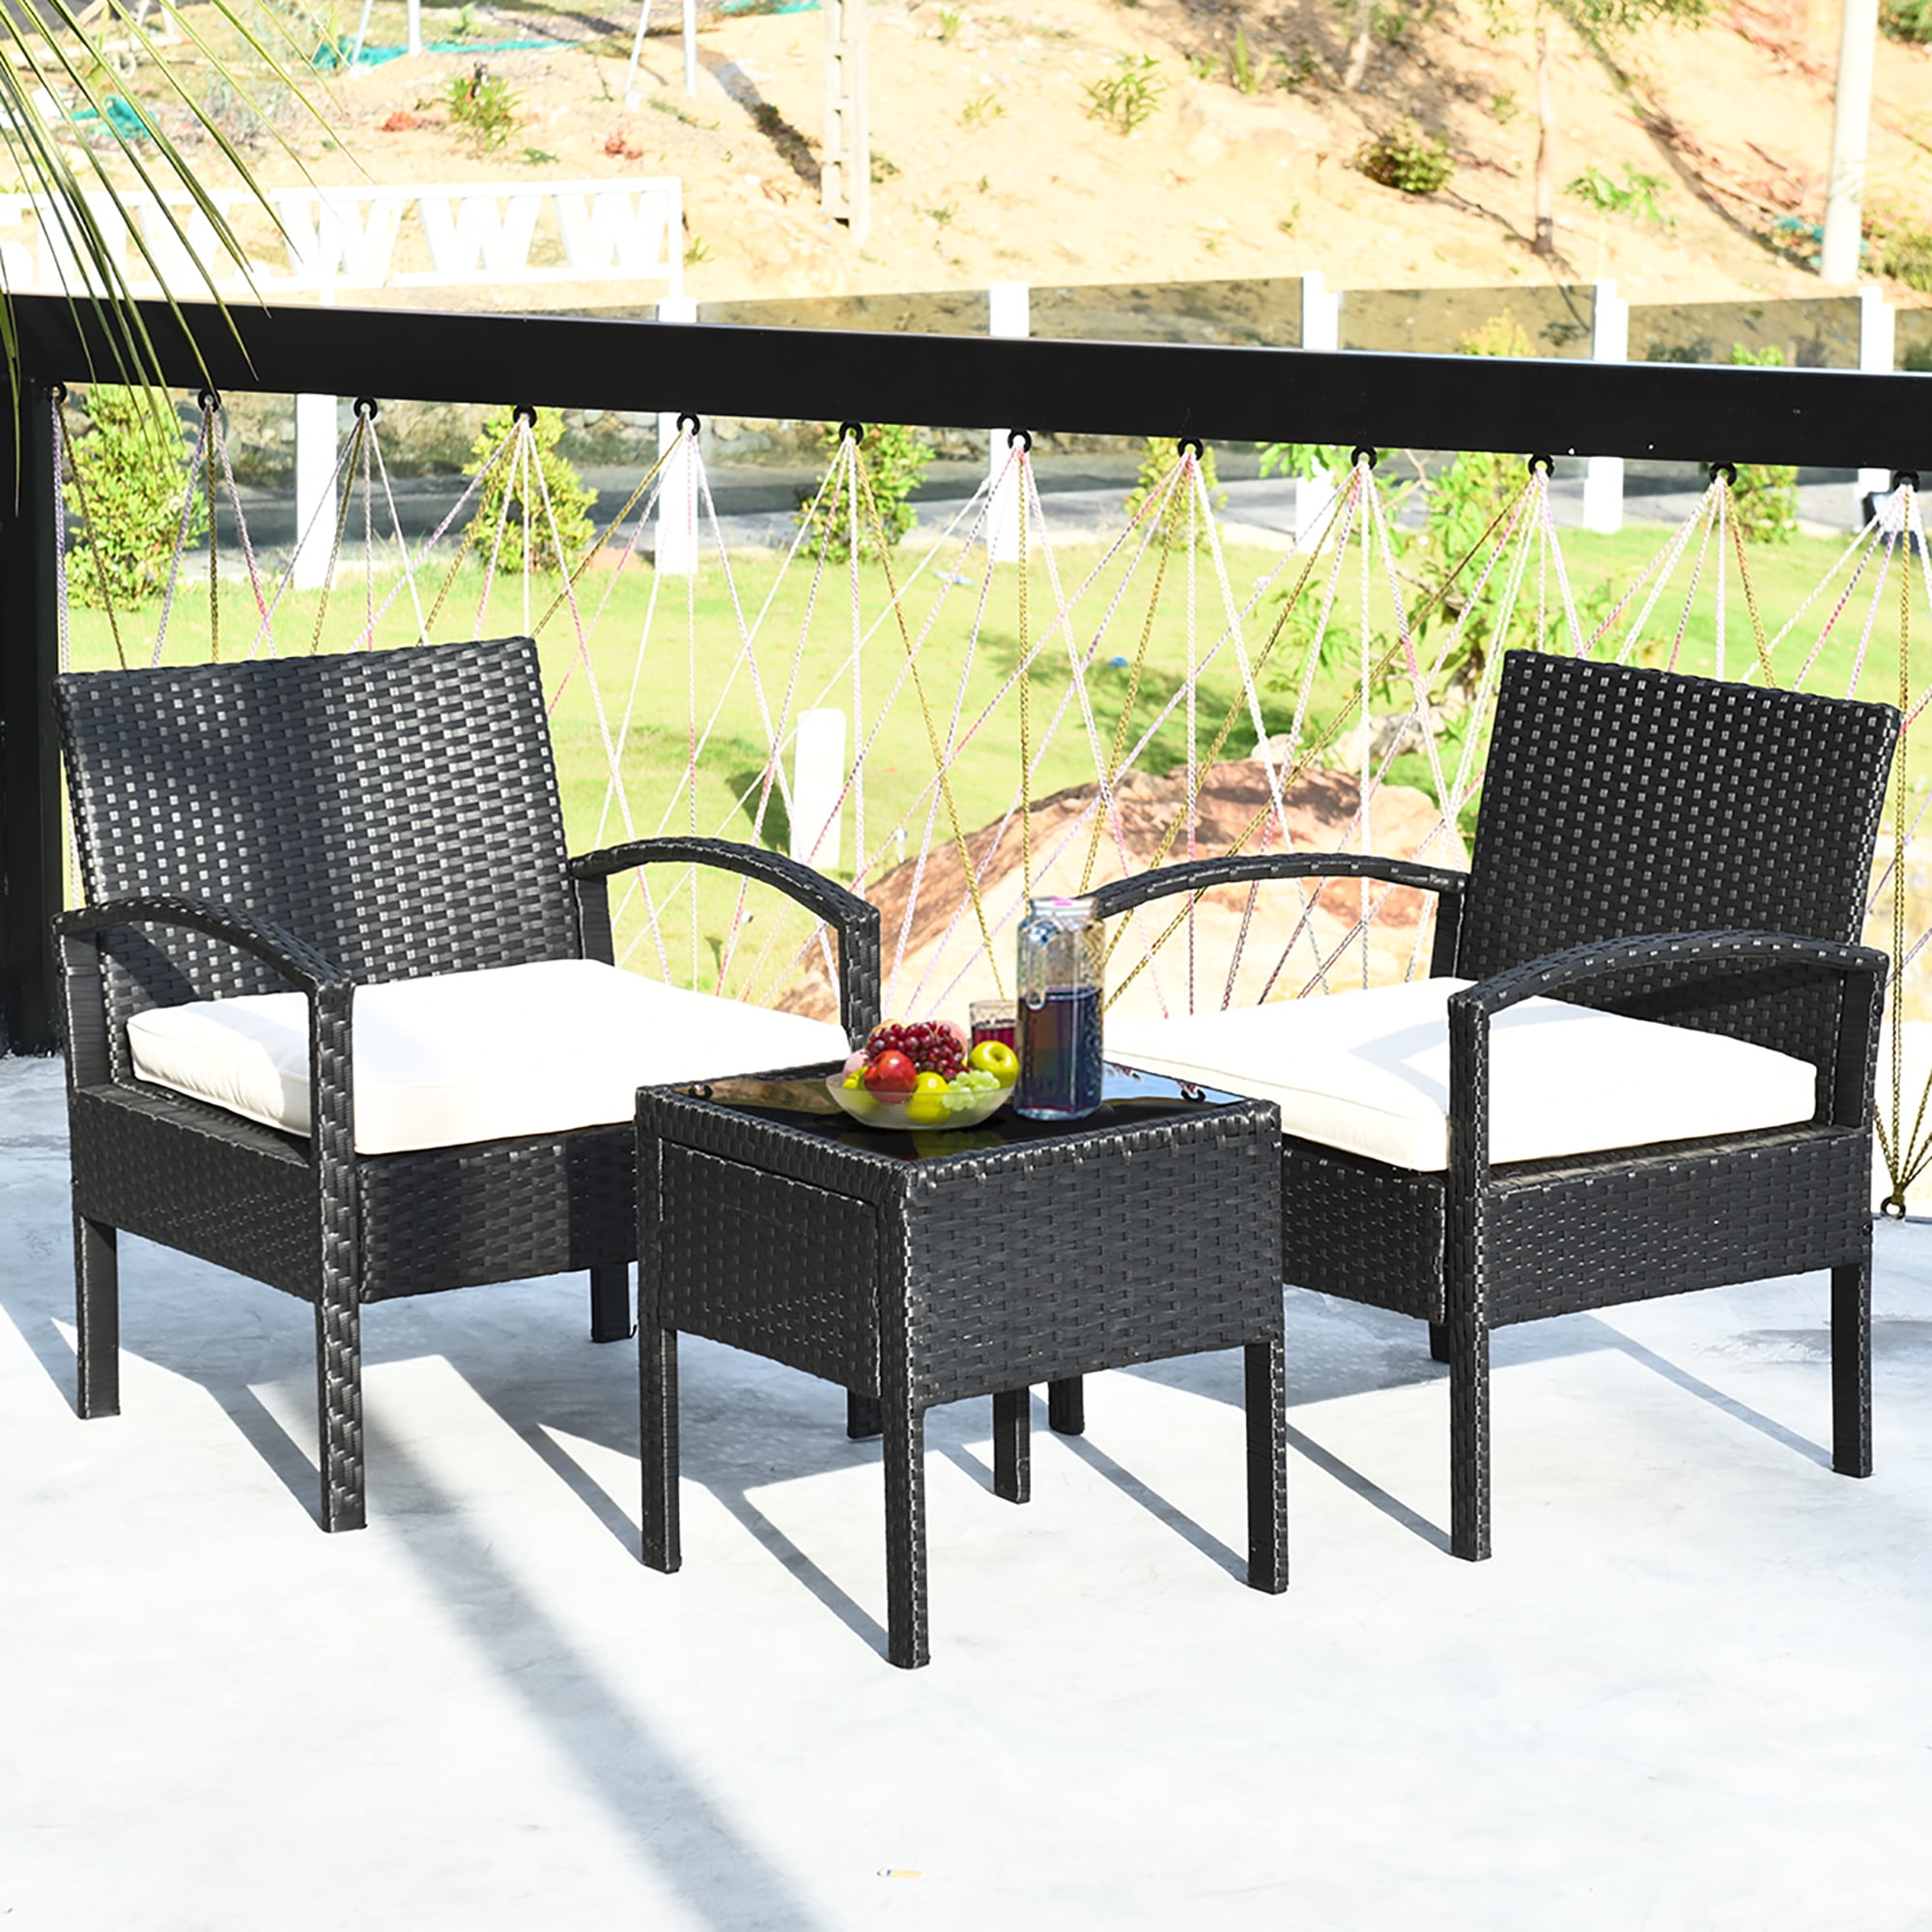 Costway 3 Pieces Patio Rattan Furniture Set Table Chairs With Cushions Outdoor Com - 3pc Rattan Garden Patio Furniture Set